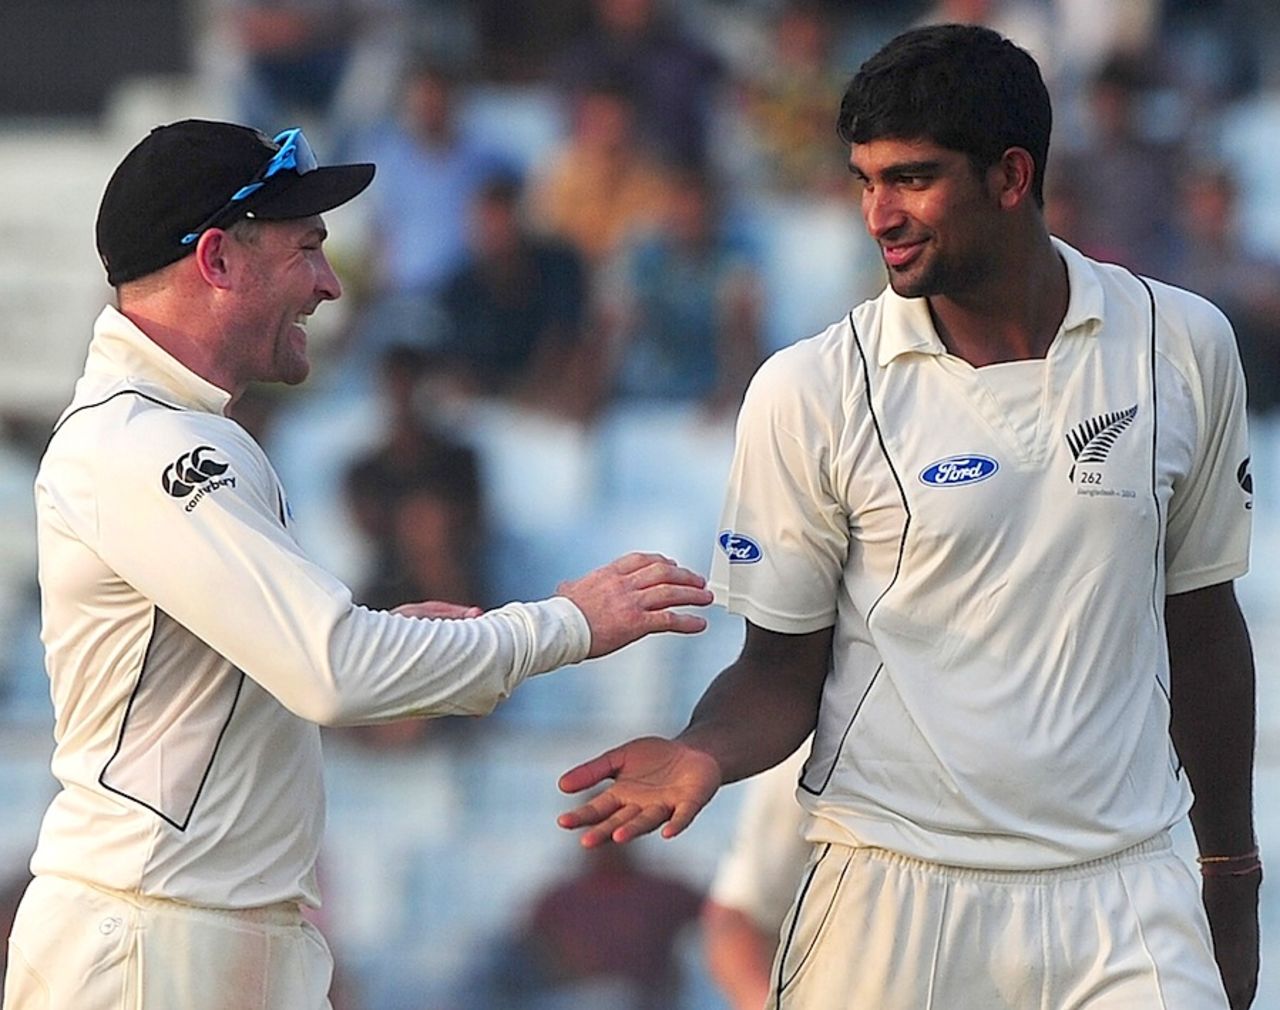 Ish Sodhi is congratulated after picking up Nasir Hossain's wicket, Bangladesh v New Zealand, 1st Test, Chittagong, 3rd day, October 11, 2013